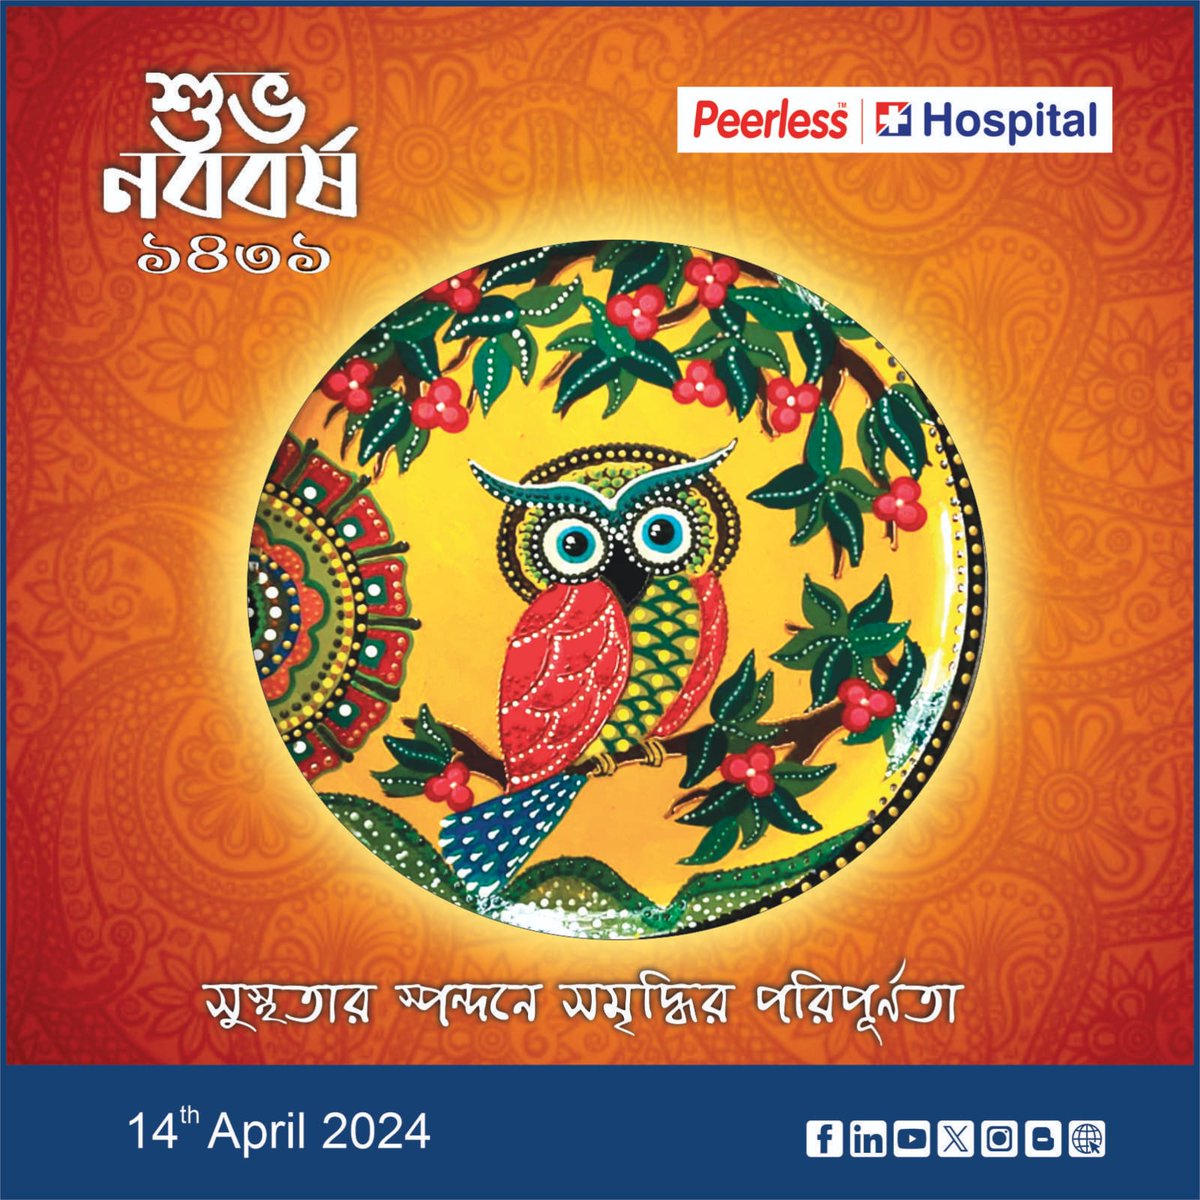 Wishing everyone a vibrant Poila Boisakh! May this new year bring you prosperity, good health, and an abundance of happiness. Let's celebrate new beginnings together! 

#shubhonoboborsho #happynewyear #goodhealth #peerlesshospital #healthcare